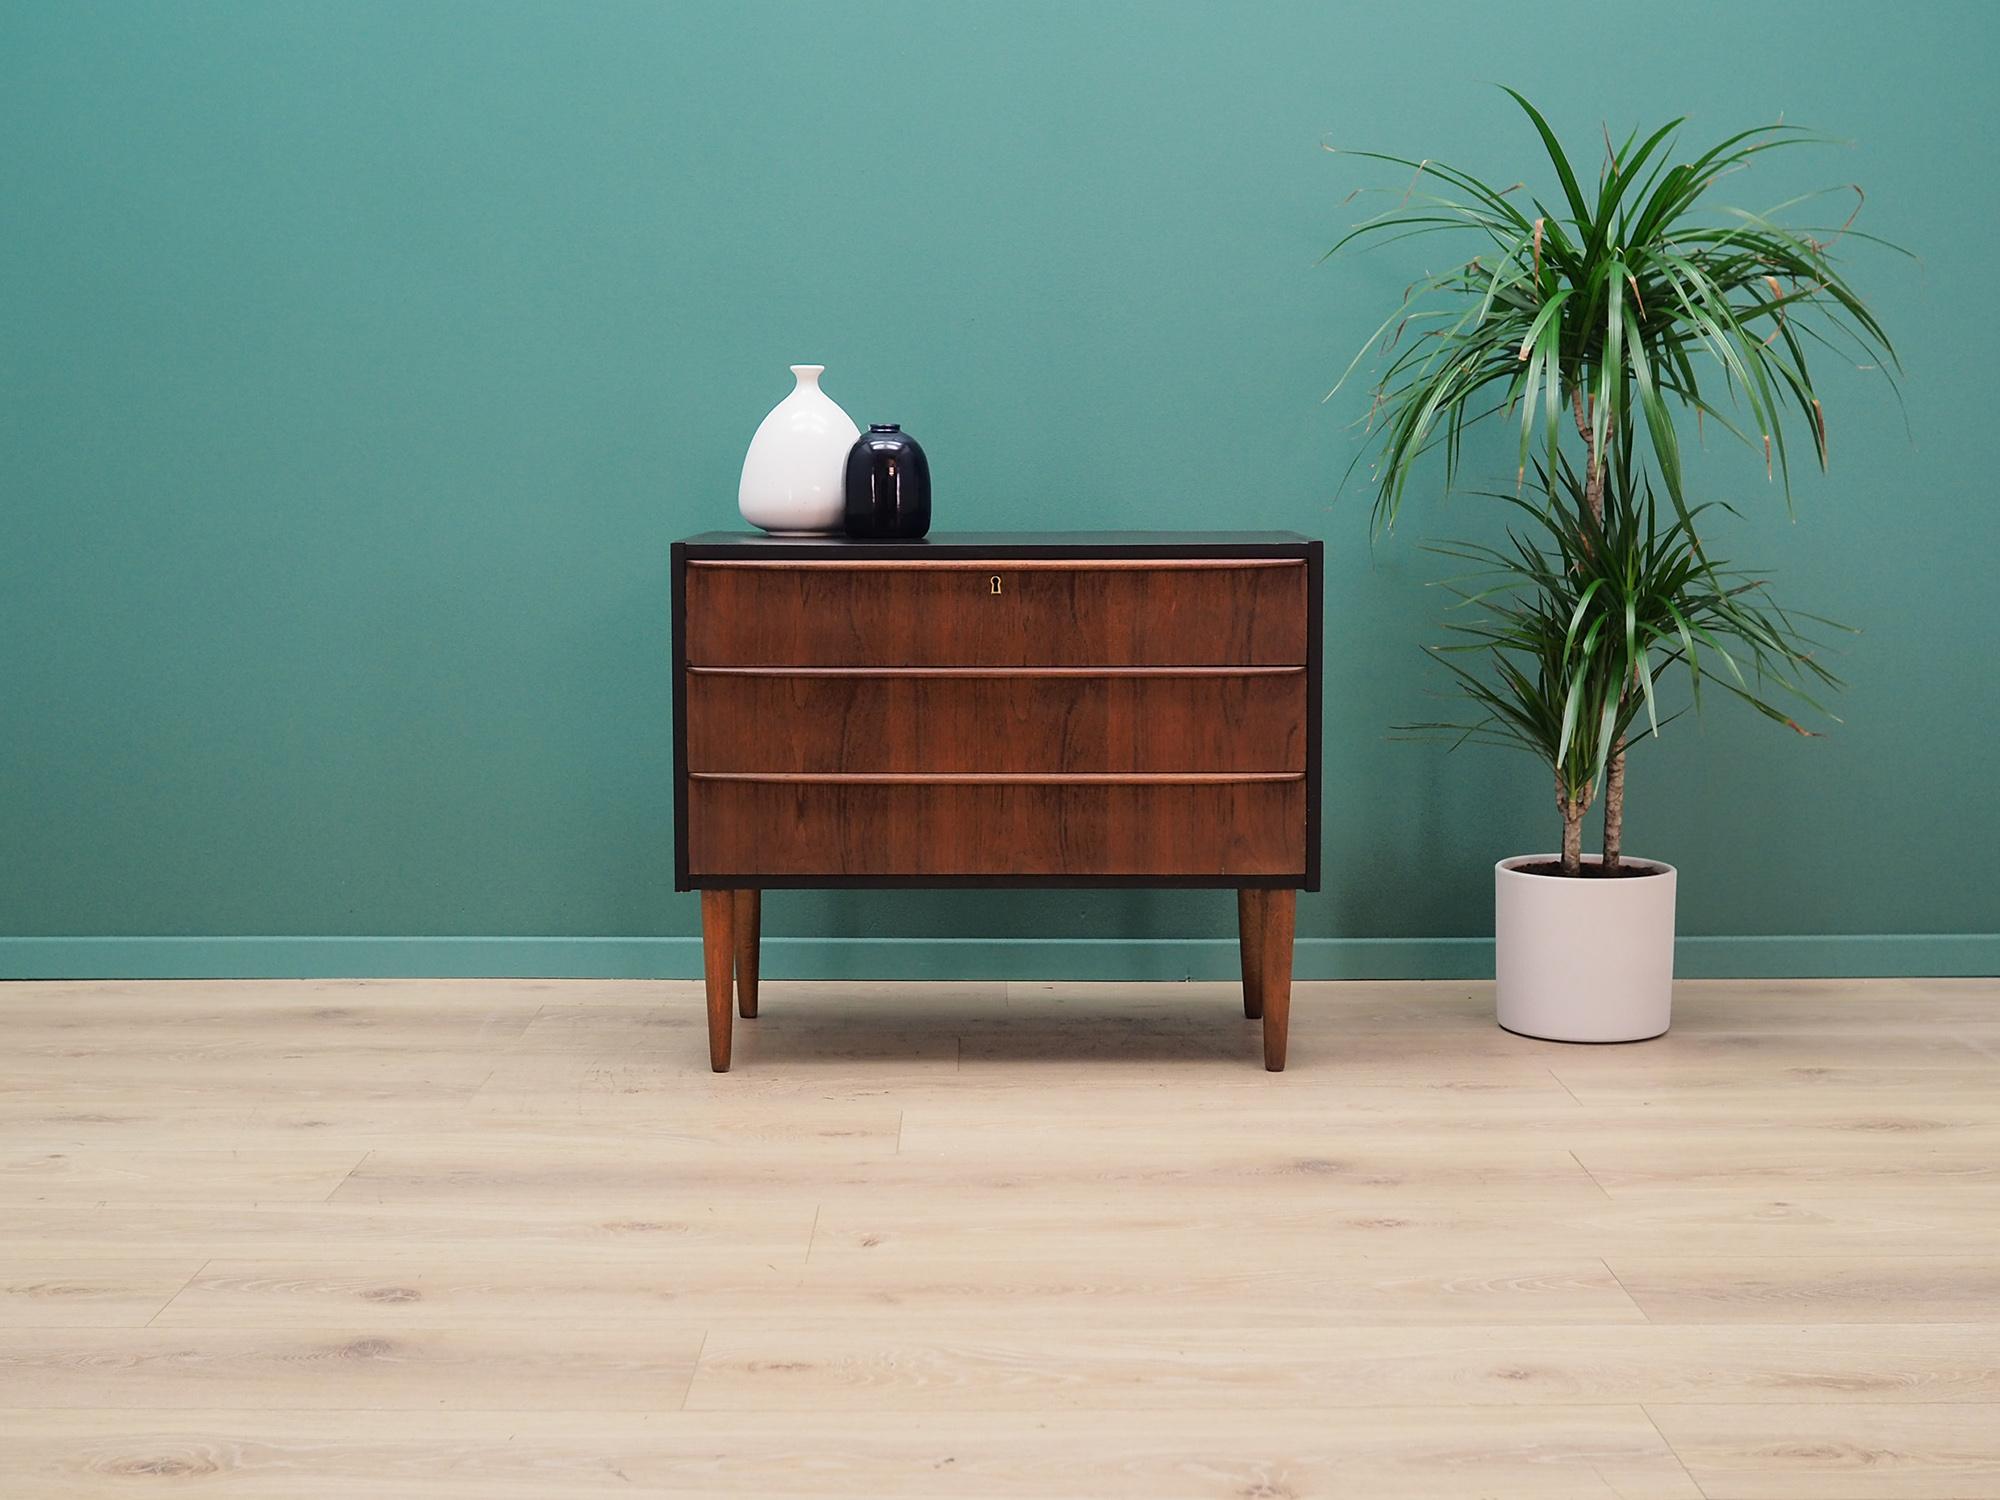 Superb chest of drawers from the 1960s-1970s, Danish design, Minimalist form. Surface of the furniture covered with teak veneer, legs made of solid teak wood. Top is colored in black. Furniture has three spacious drawers, no key. Preserved in good